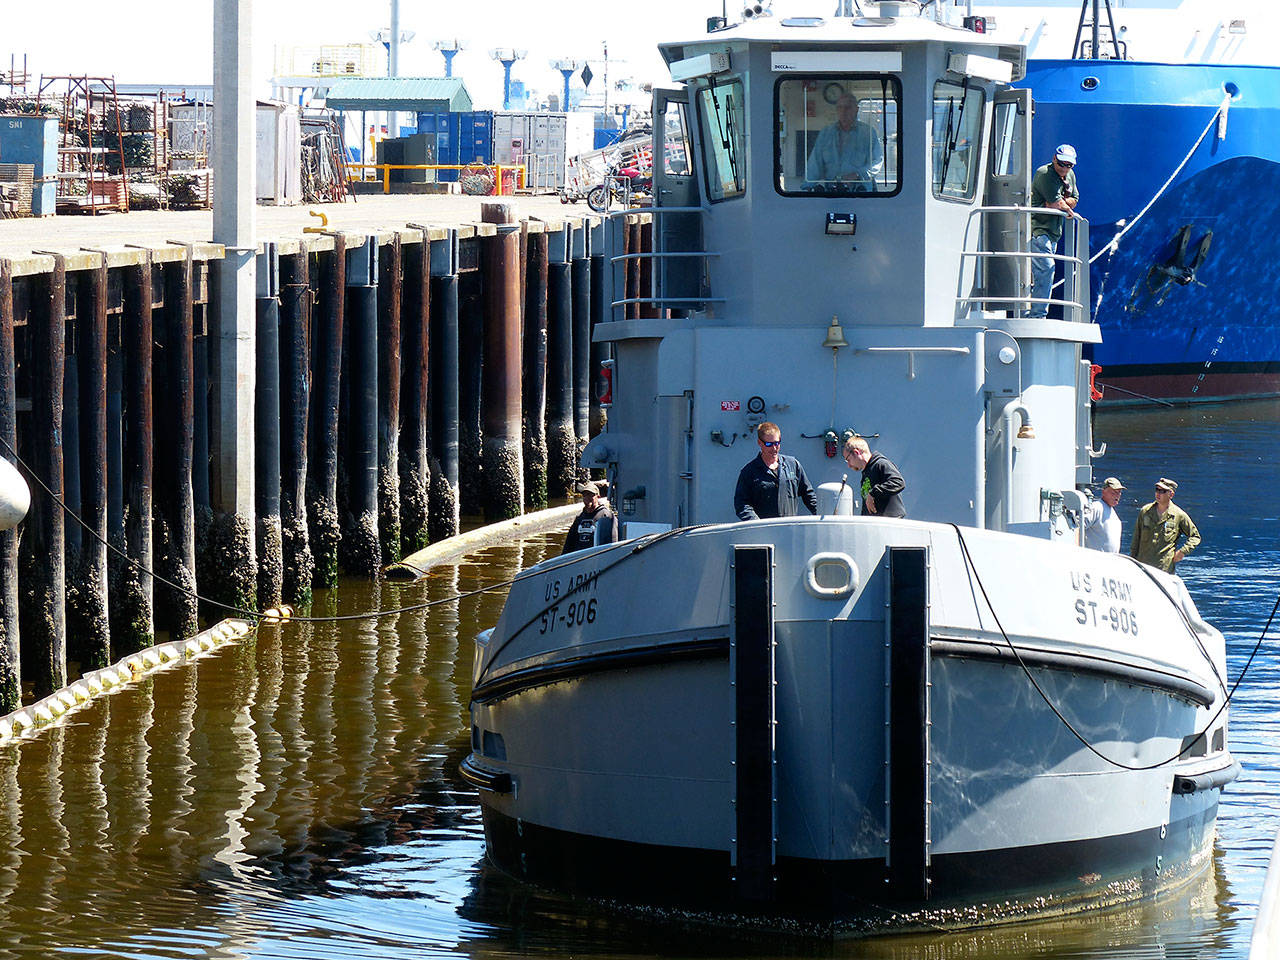 U.S. Army tug Sag Harbor approaches the haulout dock at the Port of Port Angeles. (David Sellars/for Peninsula Daily News)